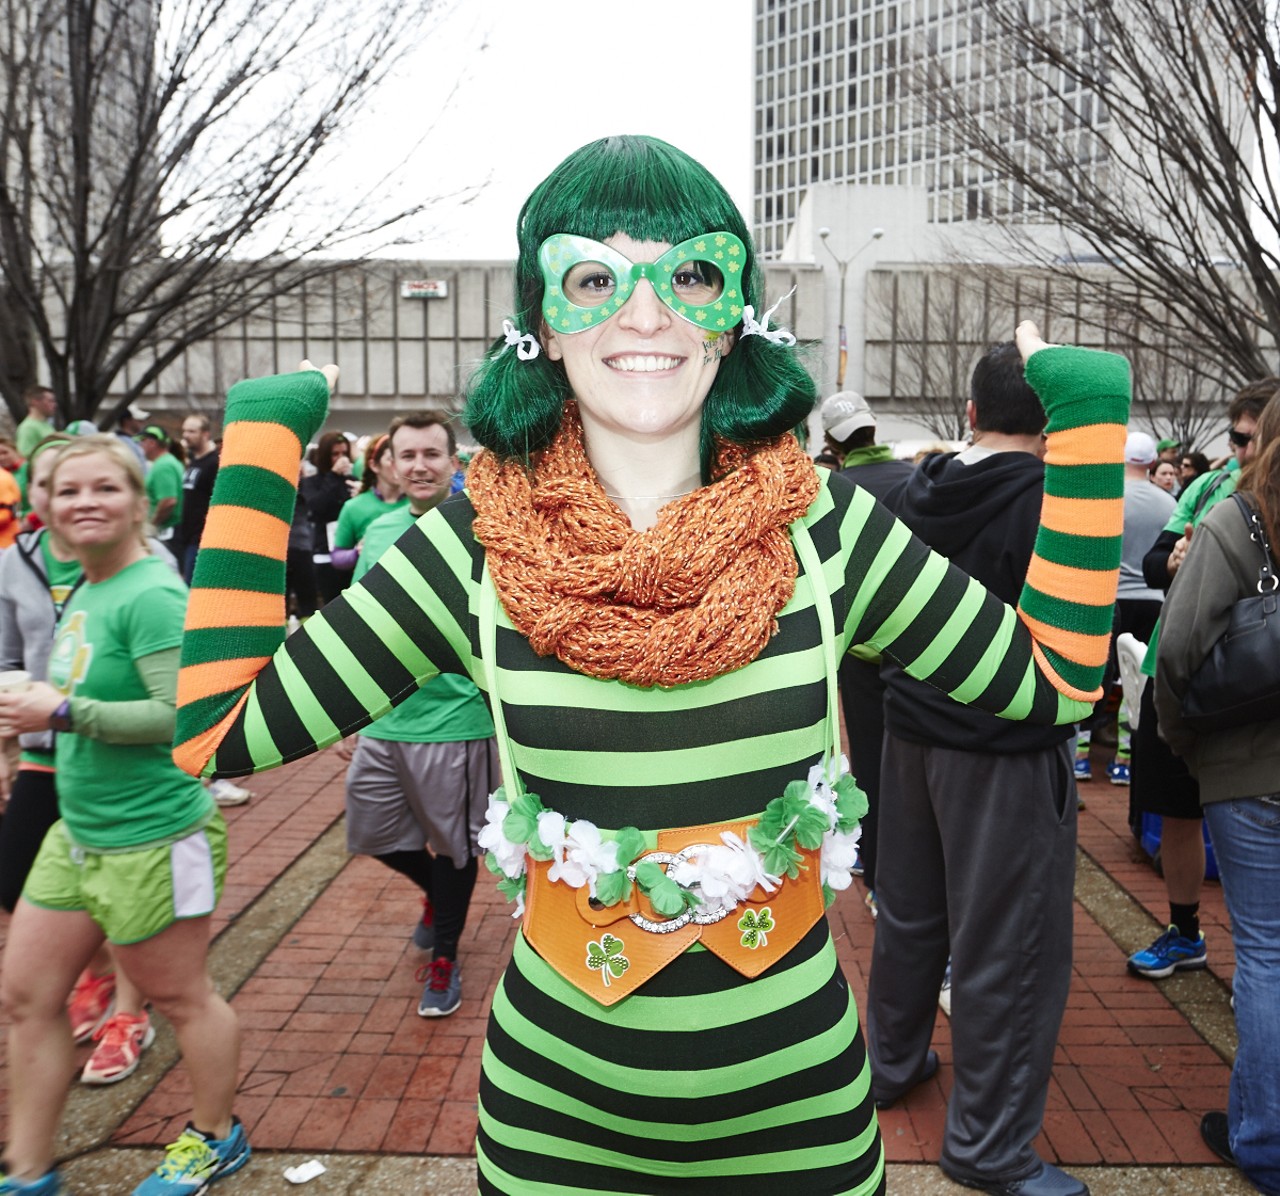 Missy Hawn poses with all her green at the 37th Annual St. Patrick's Day Parade Run in downtown St. Louis on March 14, 2015.